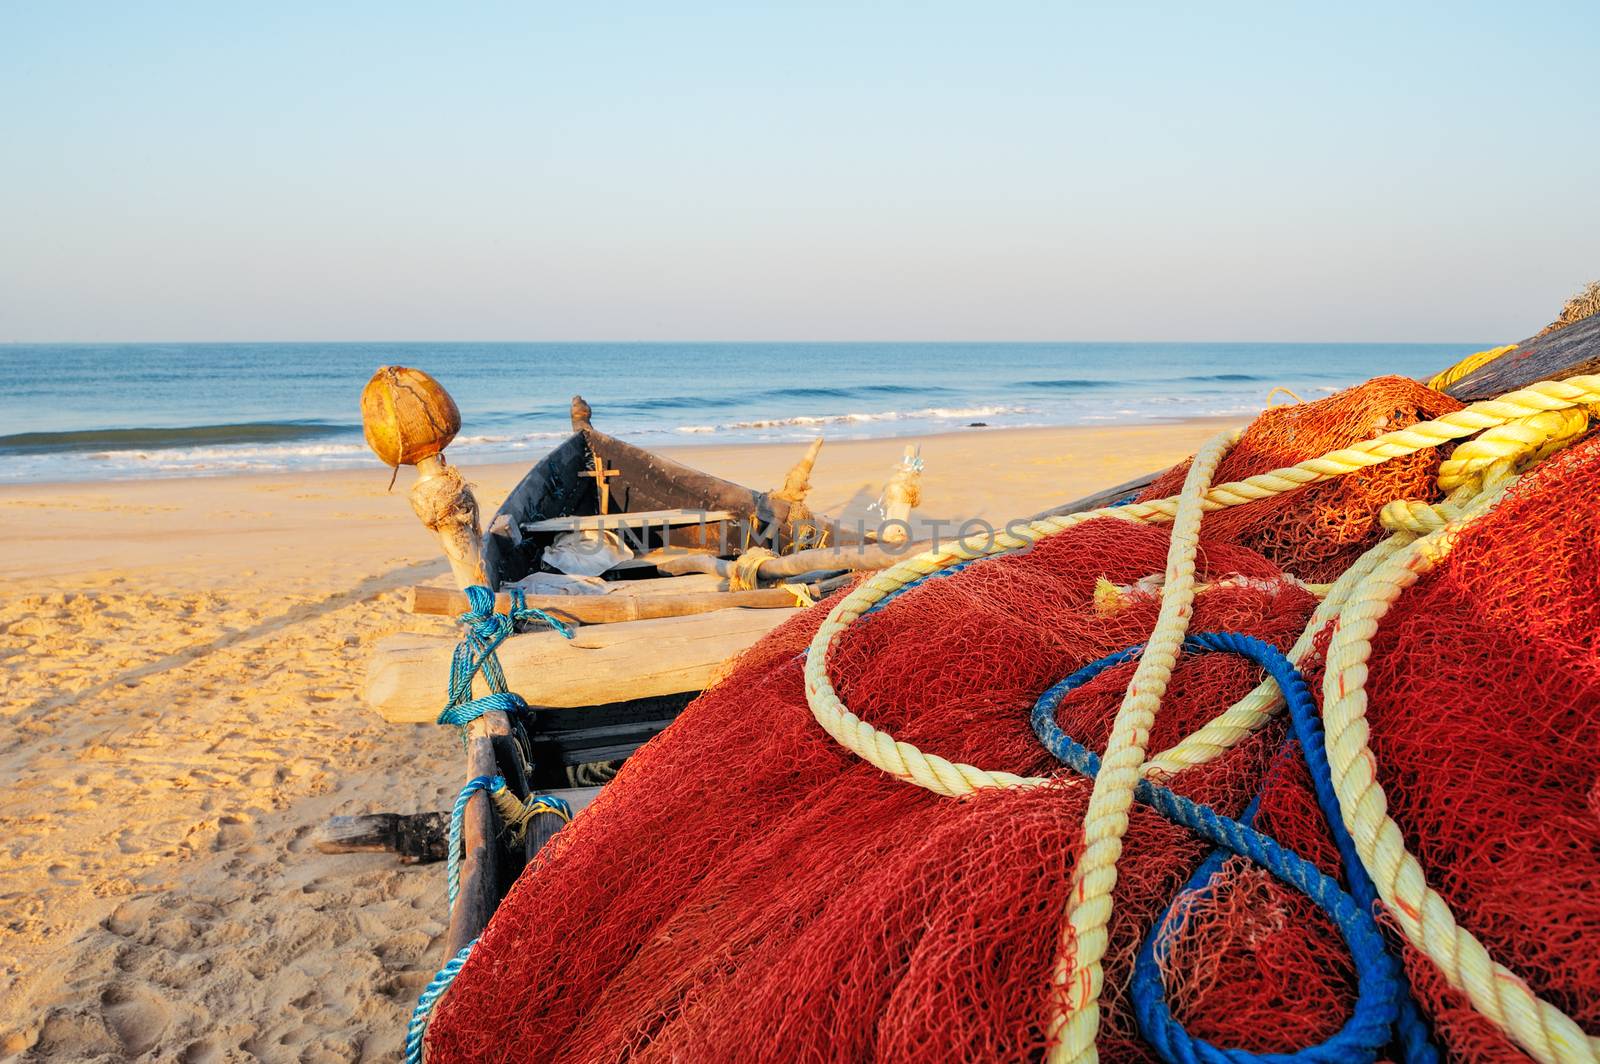 Red fishing net, Goa, India by styf22